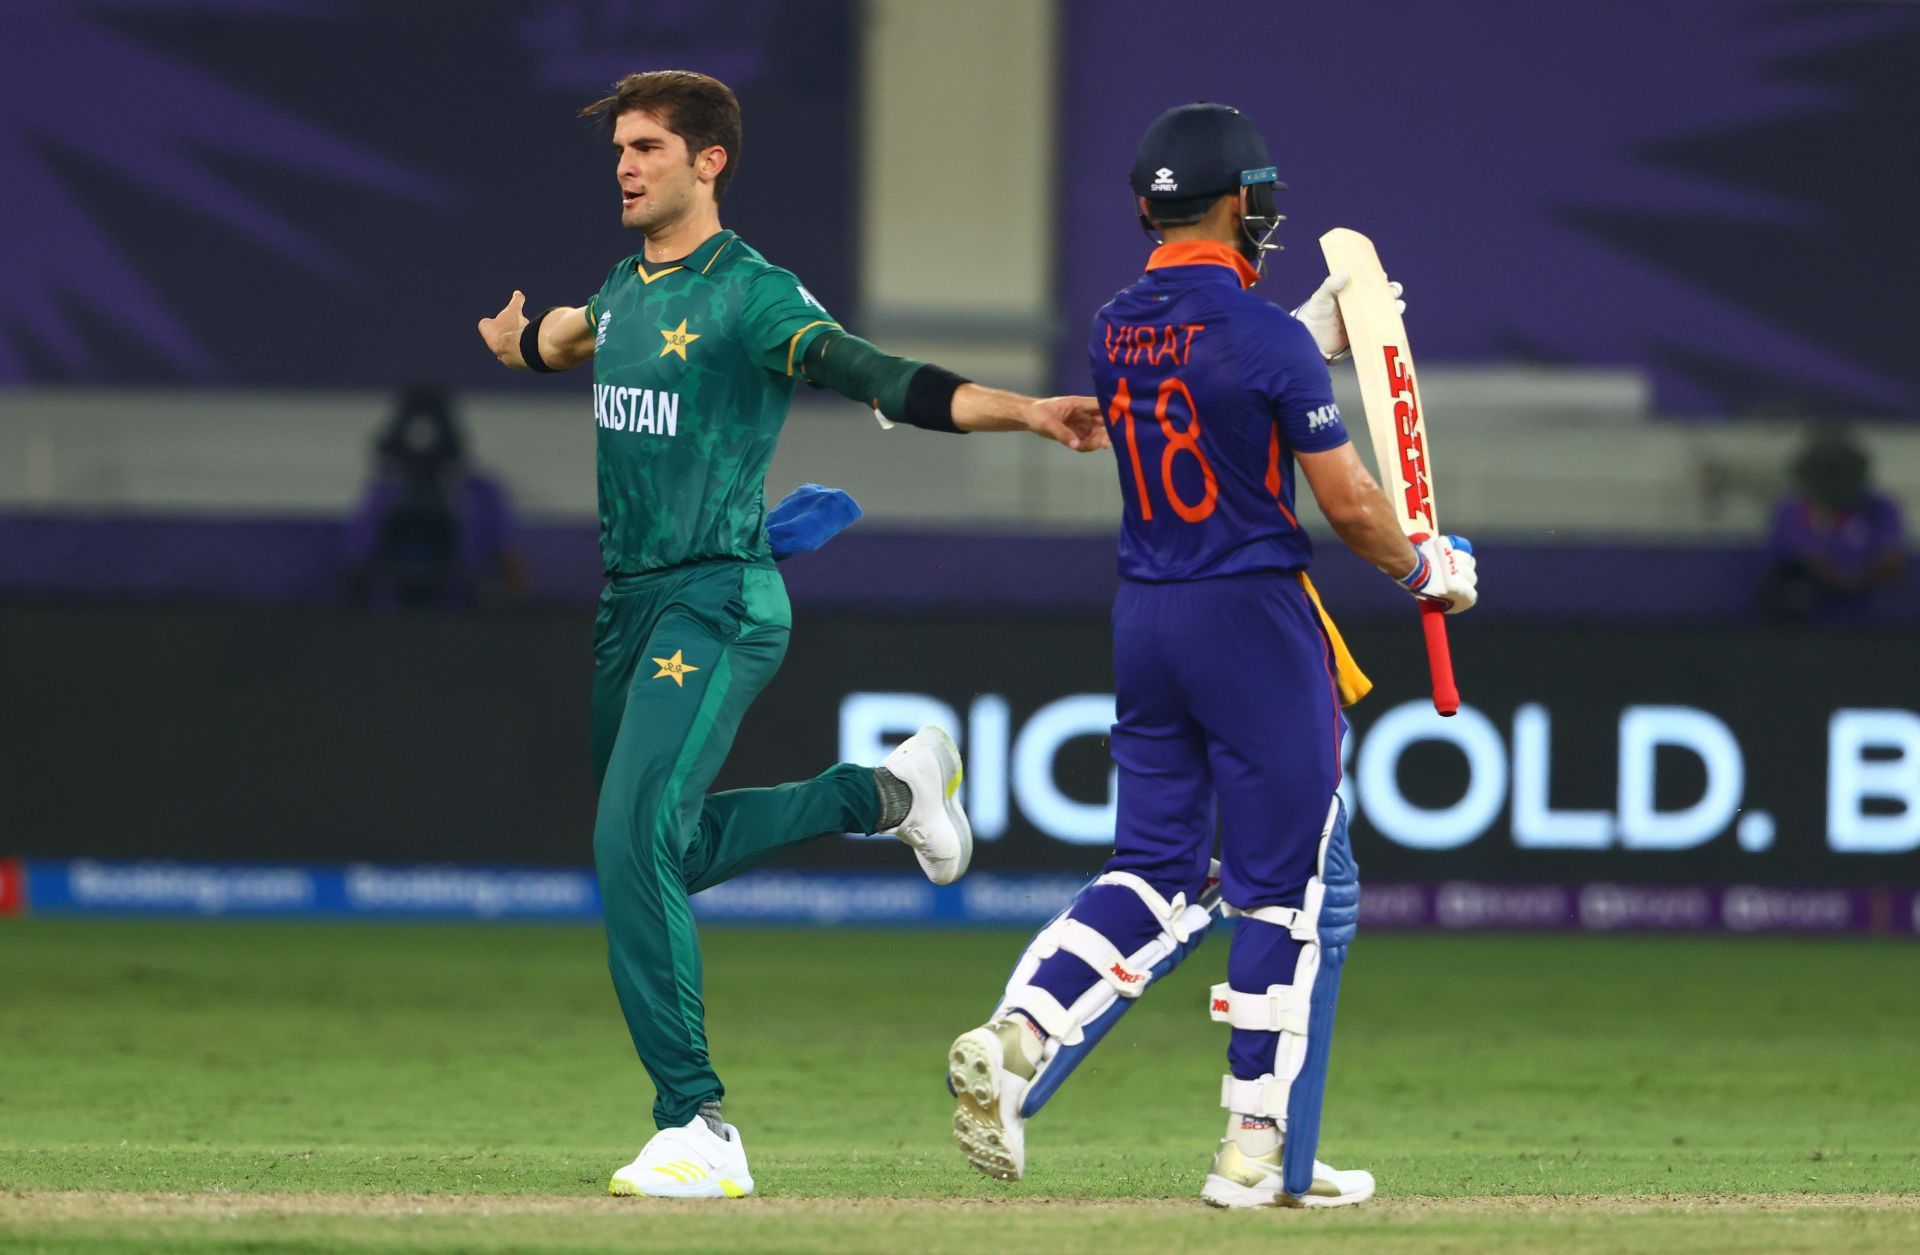 Shaheen Afridi celebrates the wicket of Virat Kohli during the T20 World Cup match. Pic: Getty Images